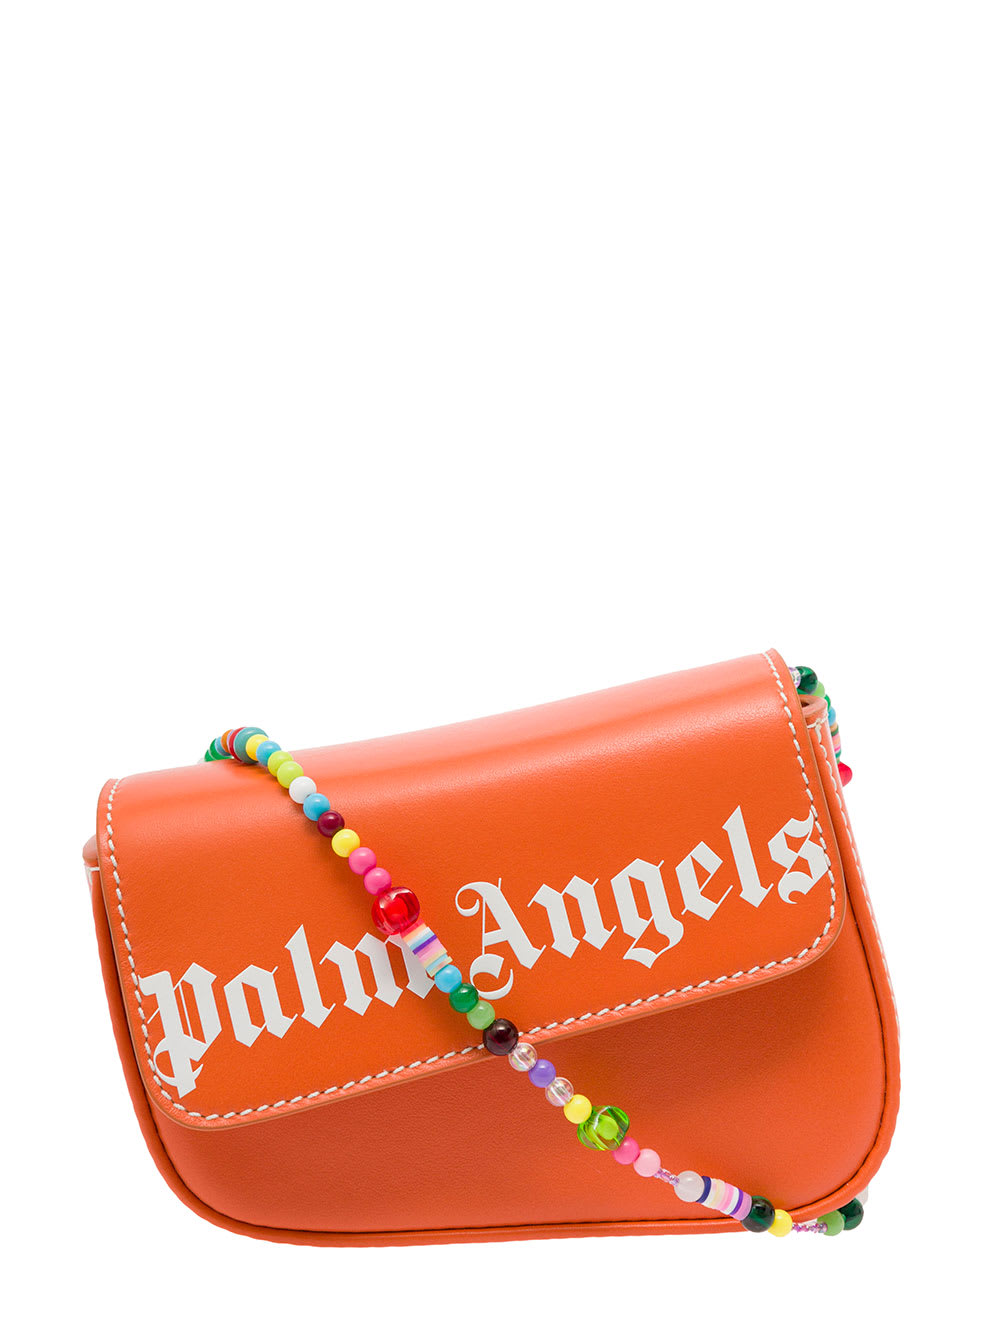 Palm Angels Palma Angels Womans Orange Leather Crossbody Bag With Beads